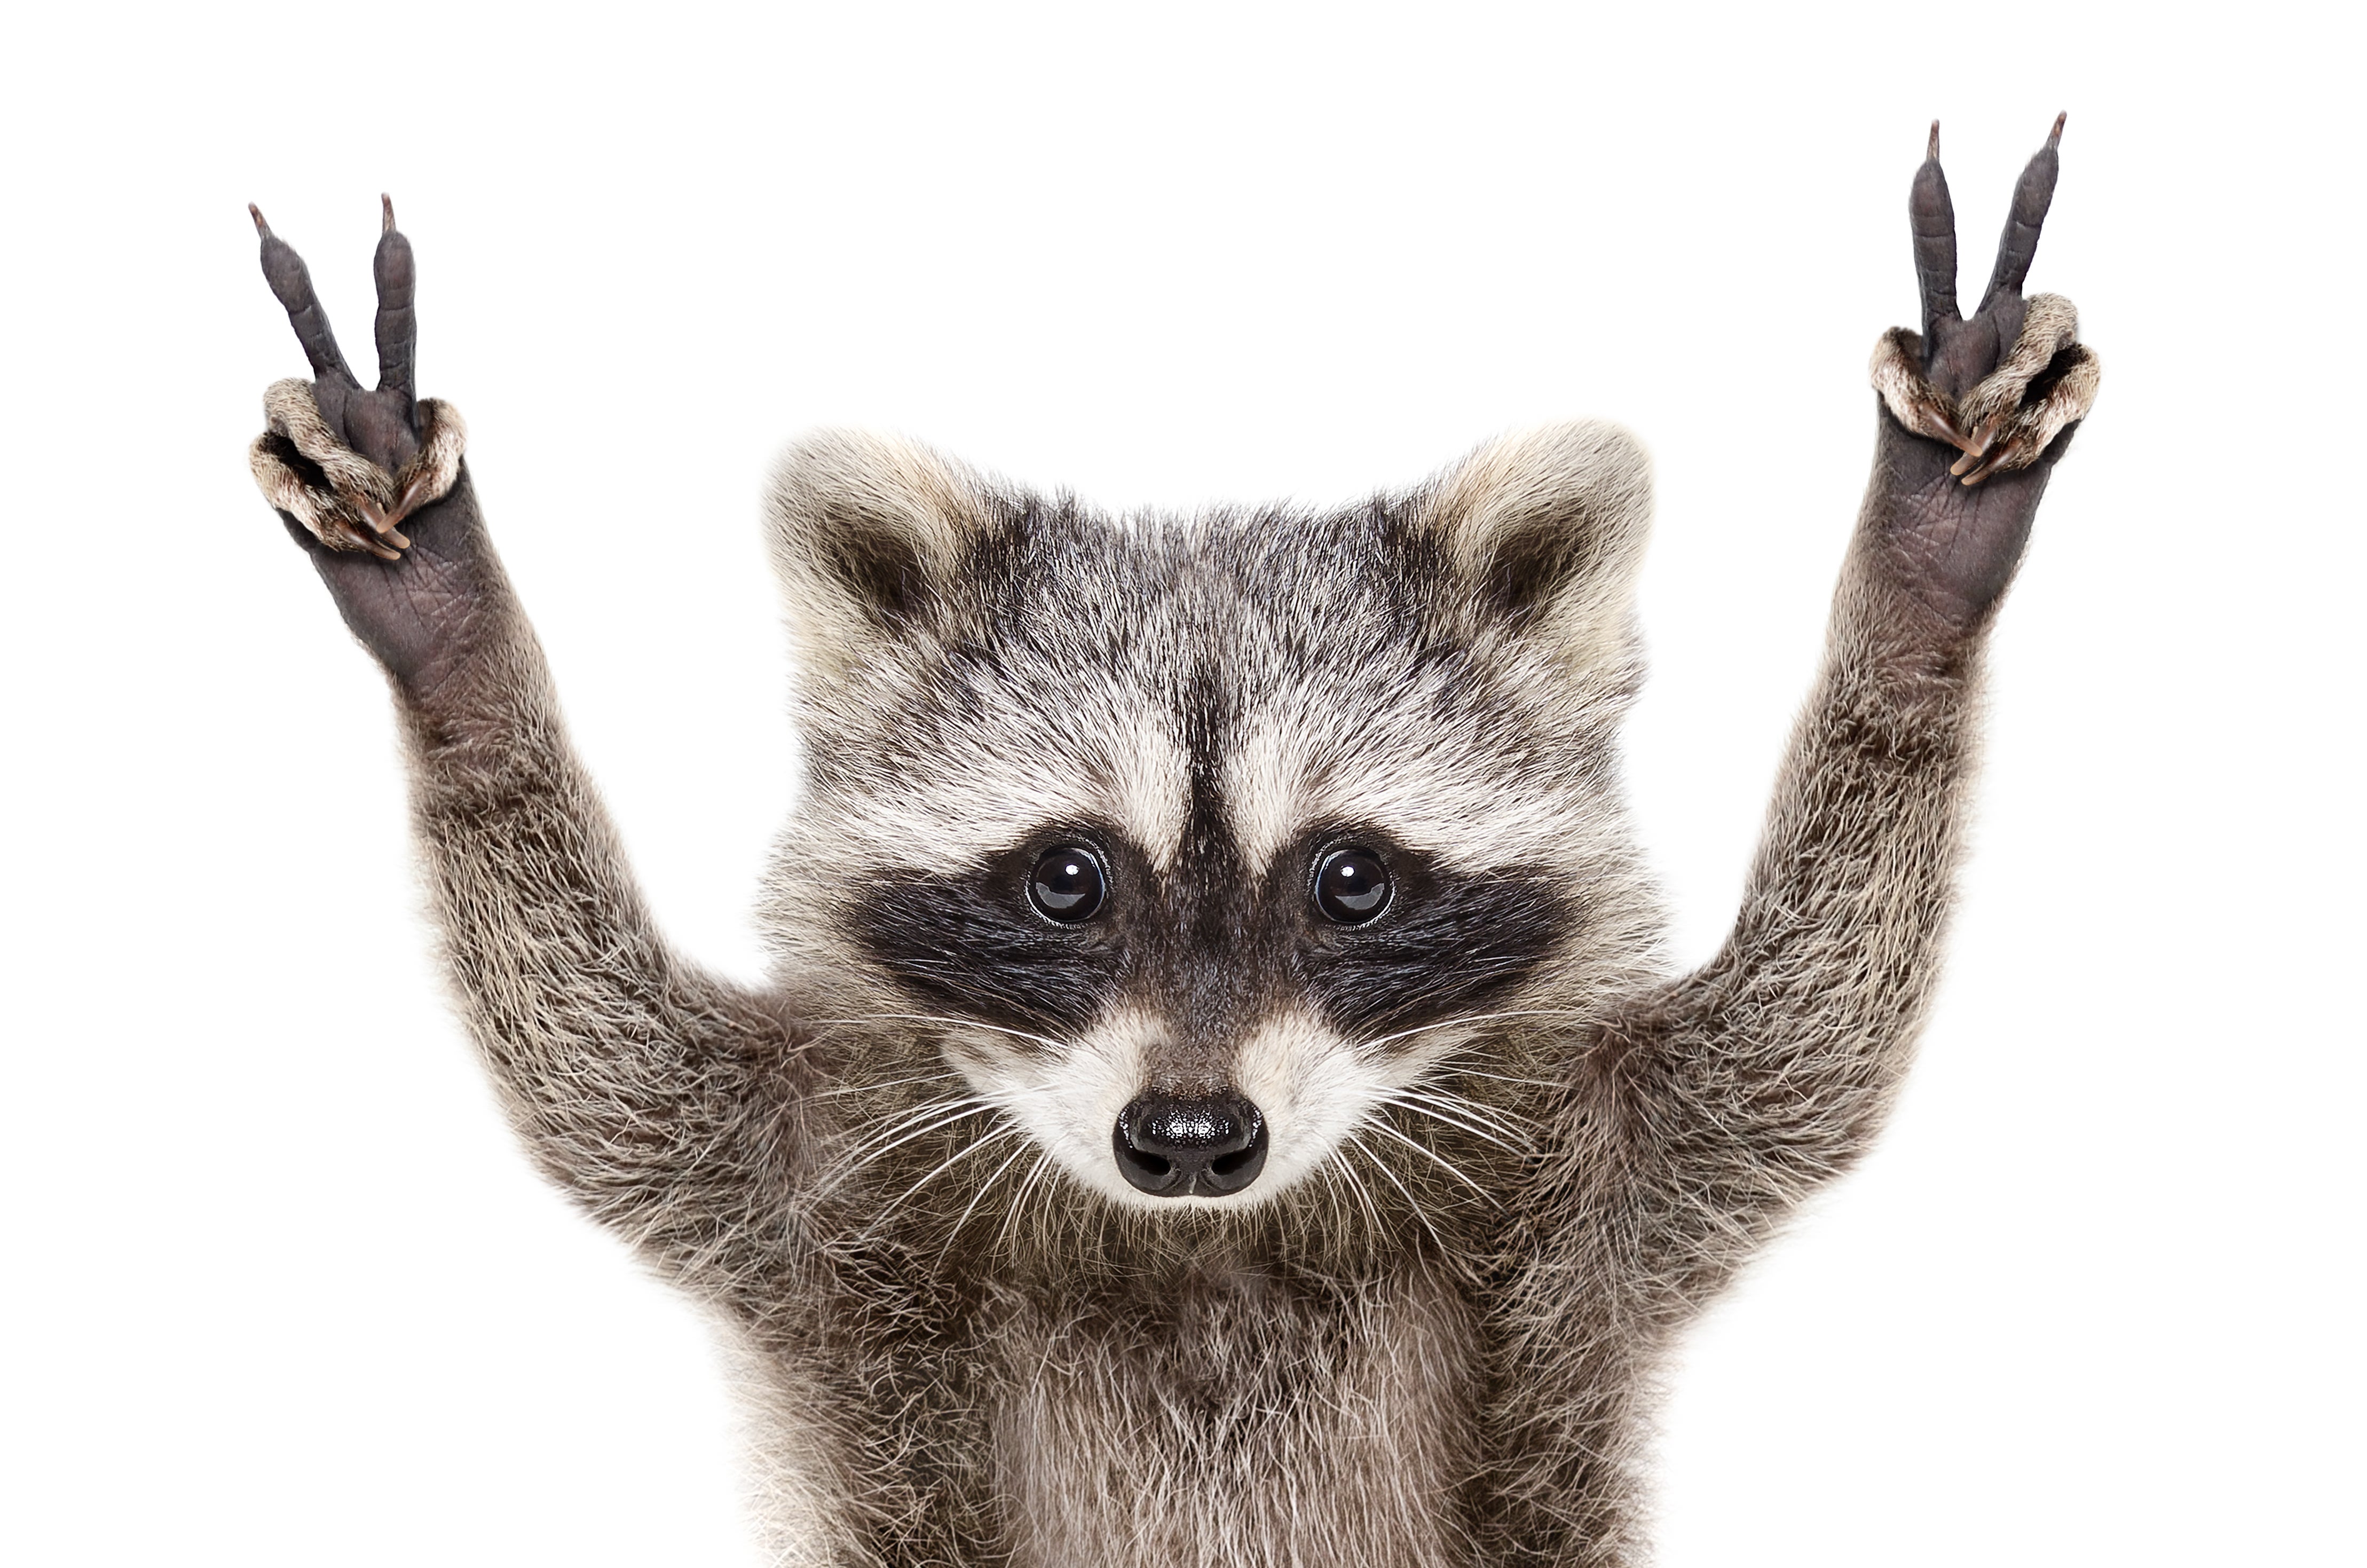 Can a Cartoon Raccoon Keep Schoolkids Safe from COVID-19? - Scientific  American